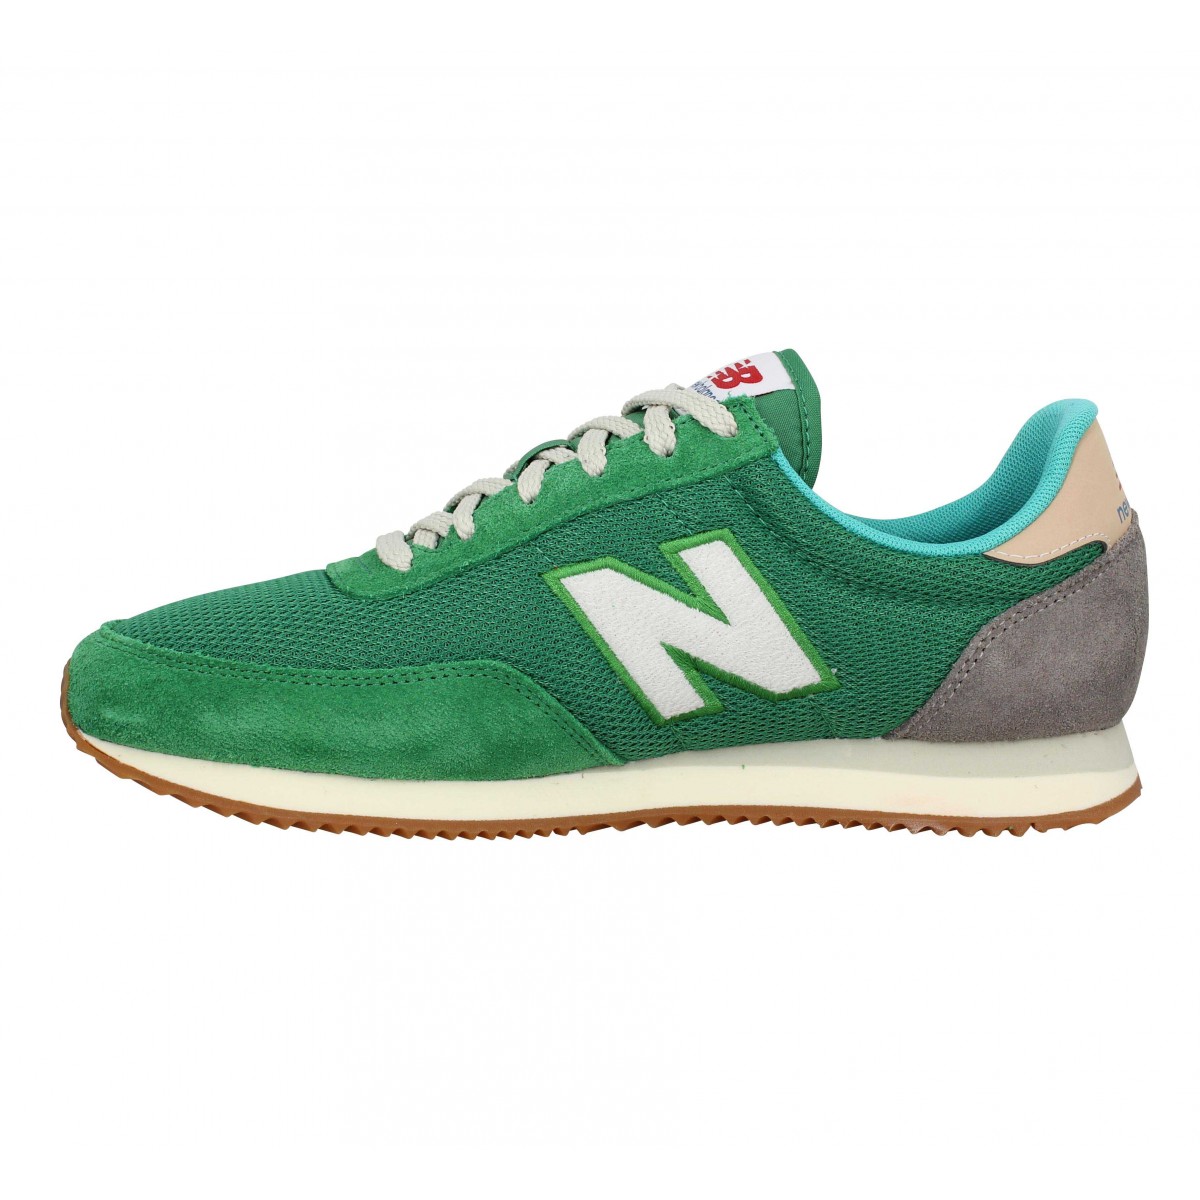 Chaussures New balance 720 yb velours toile homme vert homme ...